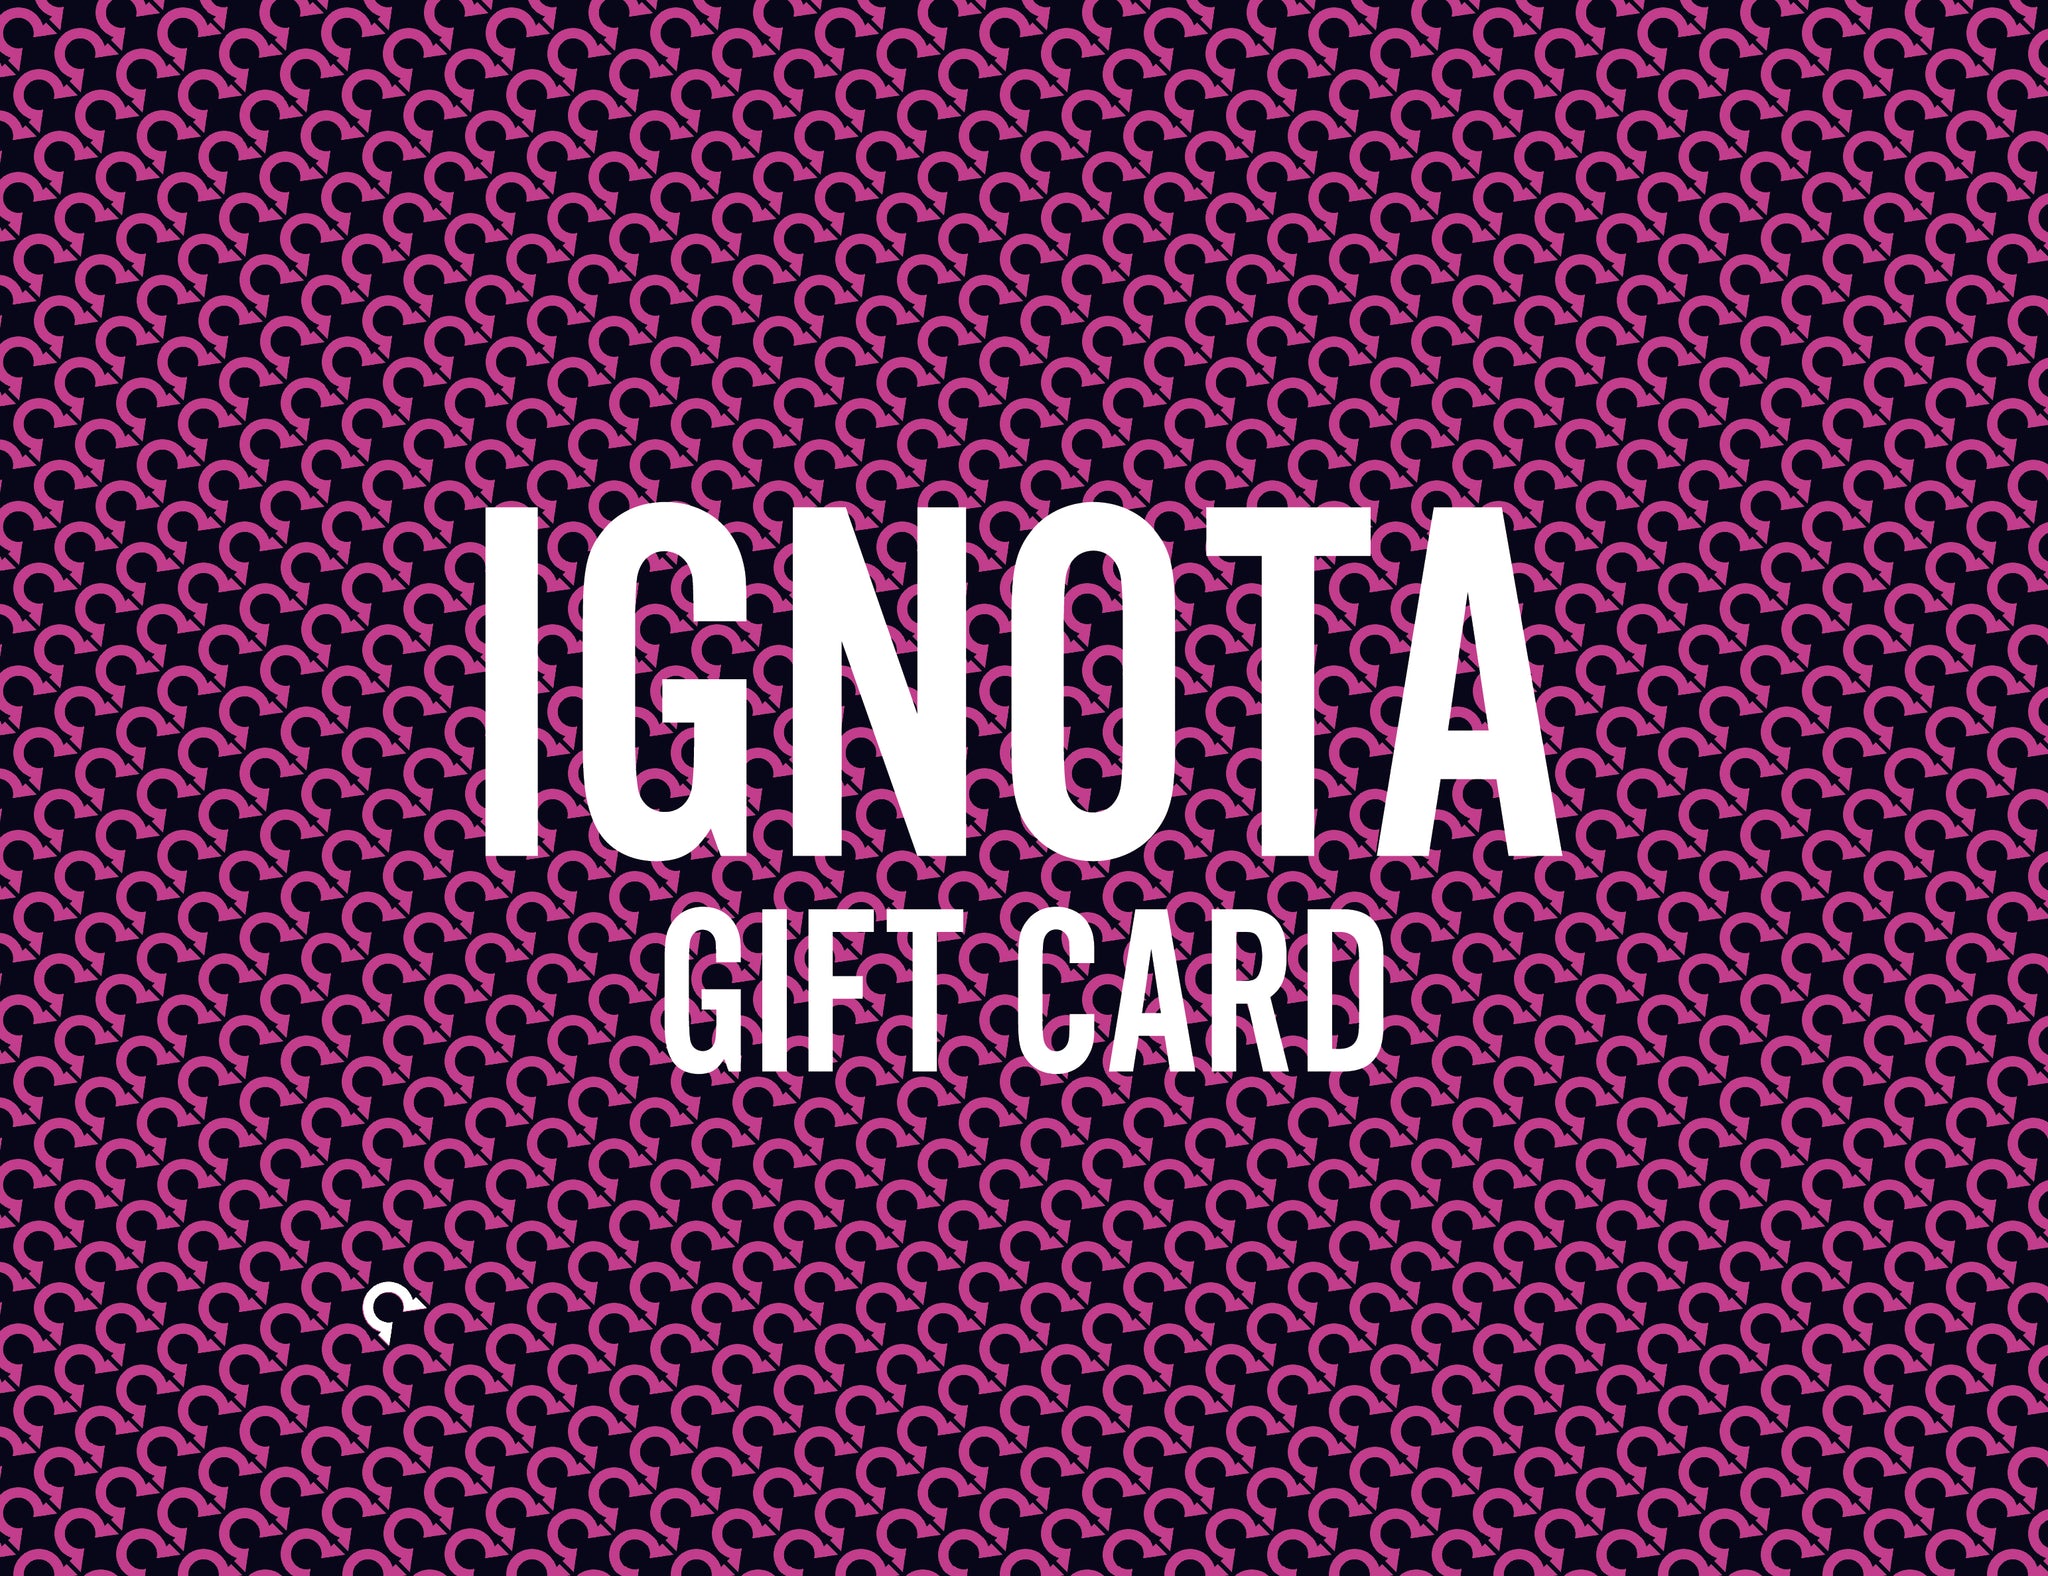 Ignota Gift Cards